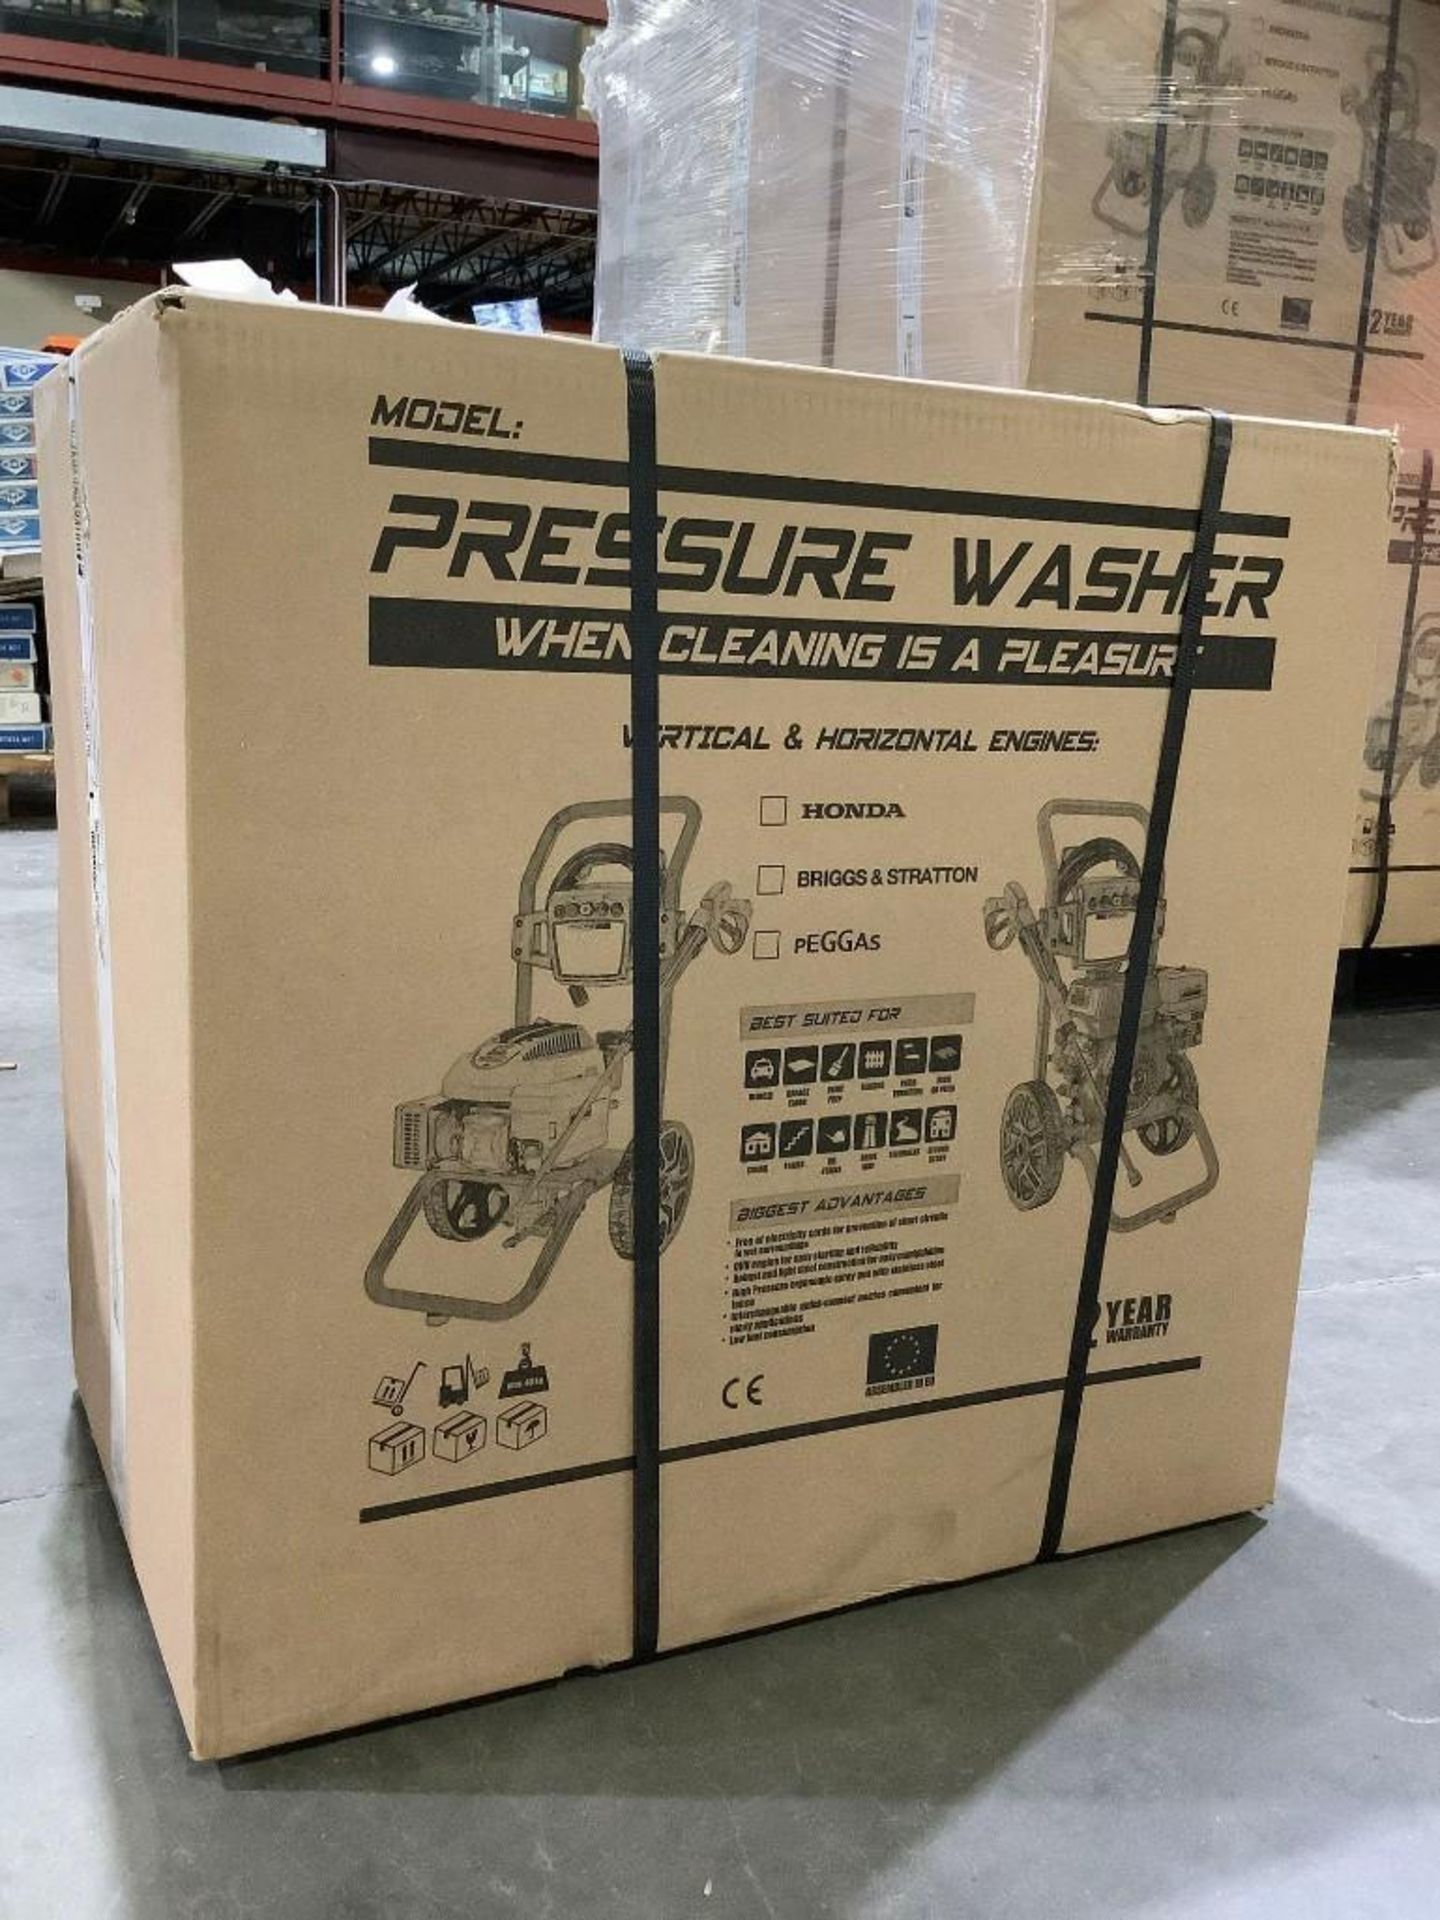 UNUSED WASPPER PRESSURE WASHER MODEL W3100VA, GAS POWERED, APPROX 3100PSI, APPROX 2.9 GPM, APPROX 6,